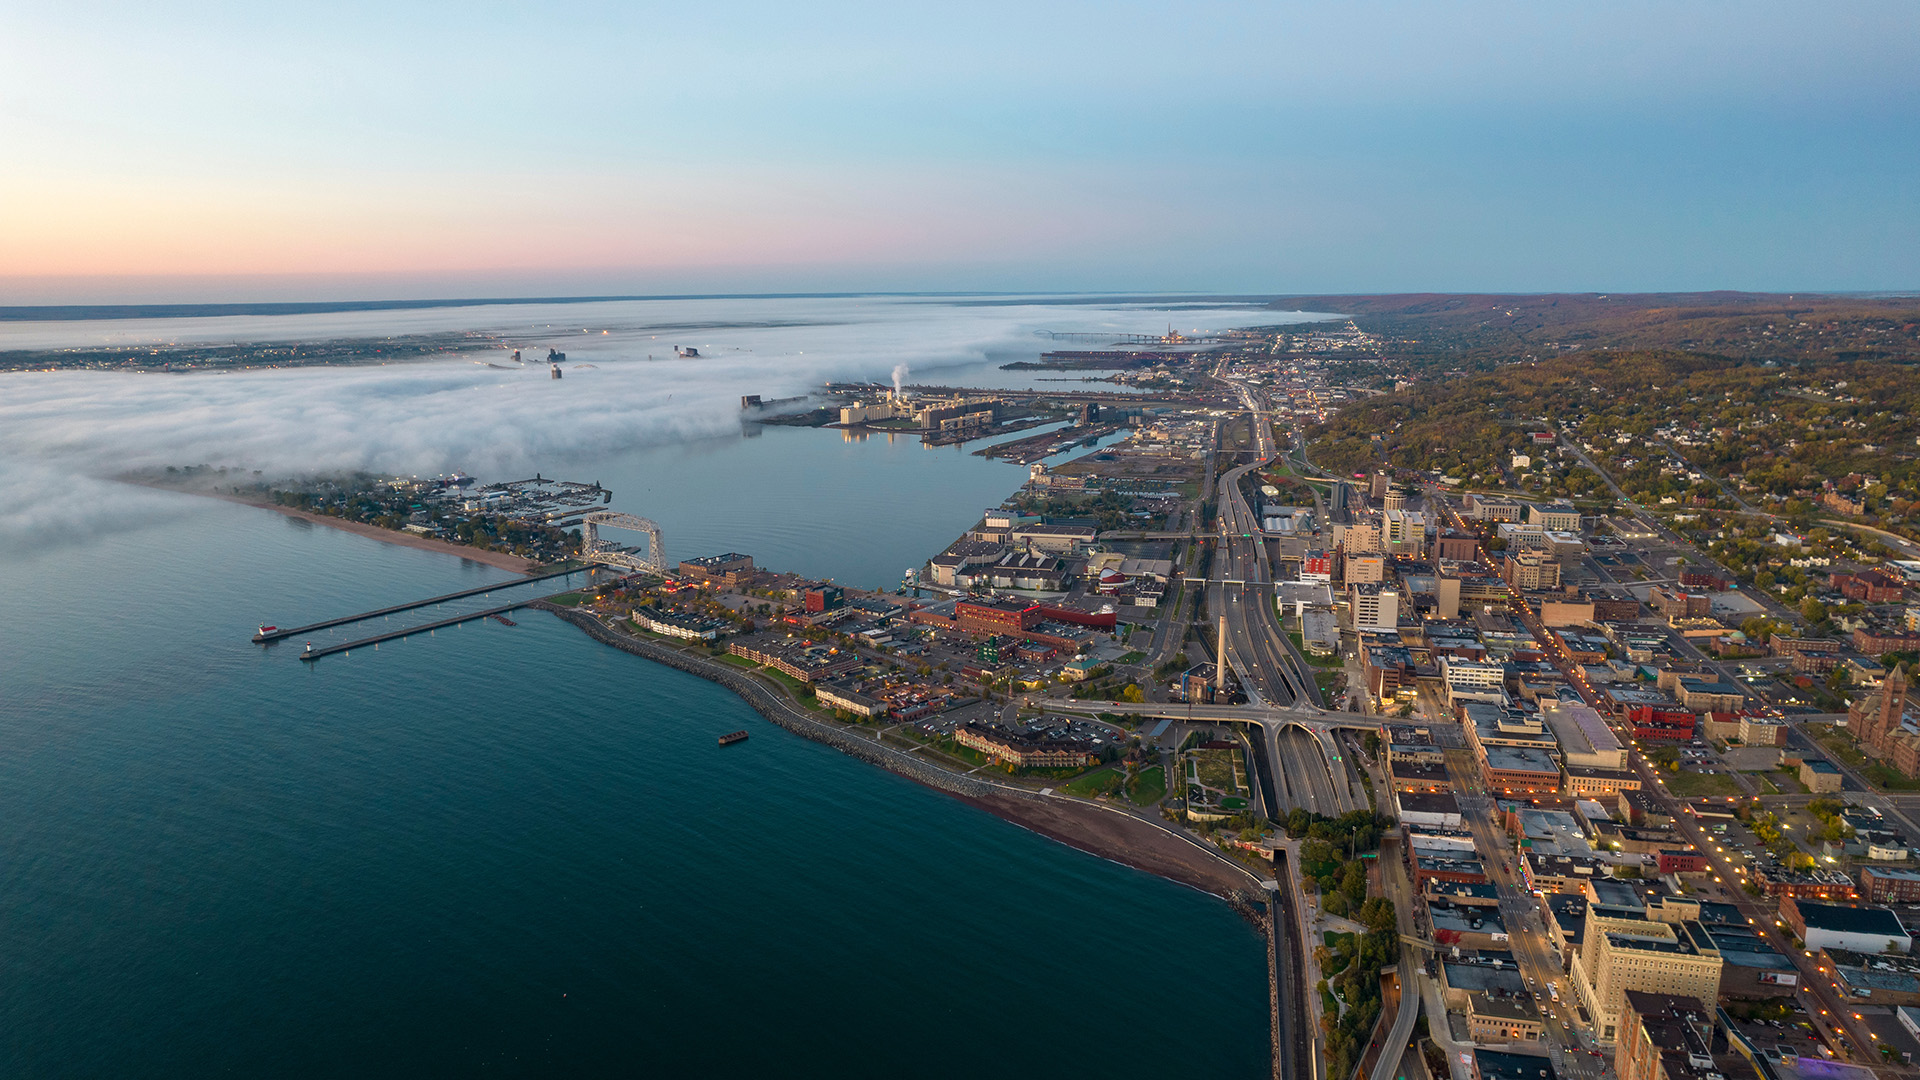 Aerial view of a coastal city with a sprawling urban area, highways, and a large body of water bordered by docks and industrial buildings. Fog covers part of the coastline in the distance. The sky is clear with soft pastel hues from the setting or rising sun near Whole Foods Co-op Duluth MN.